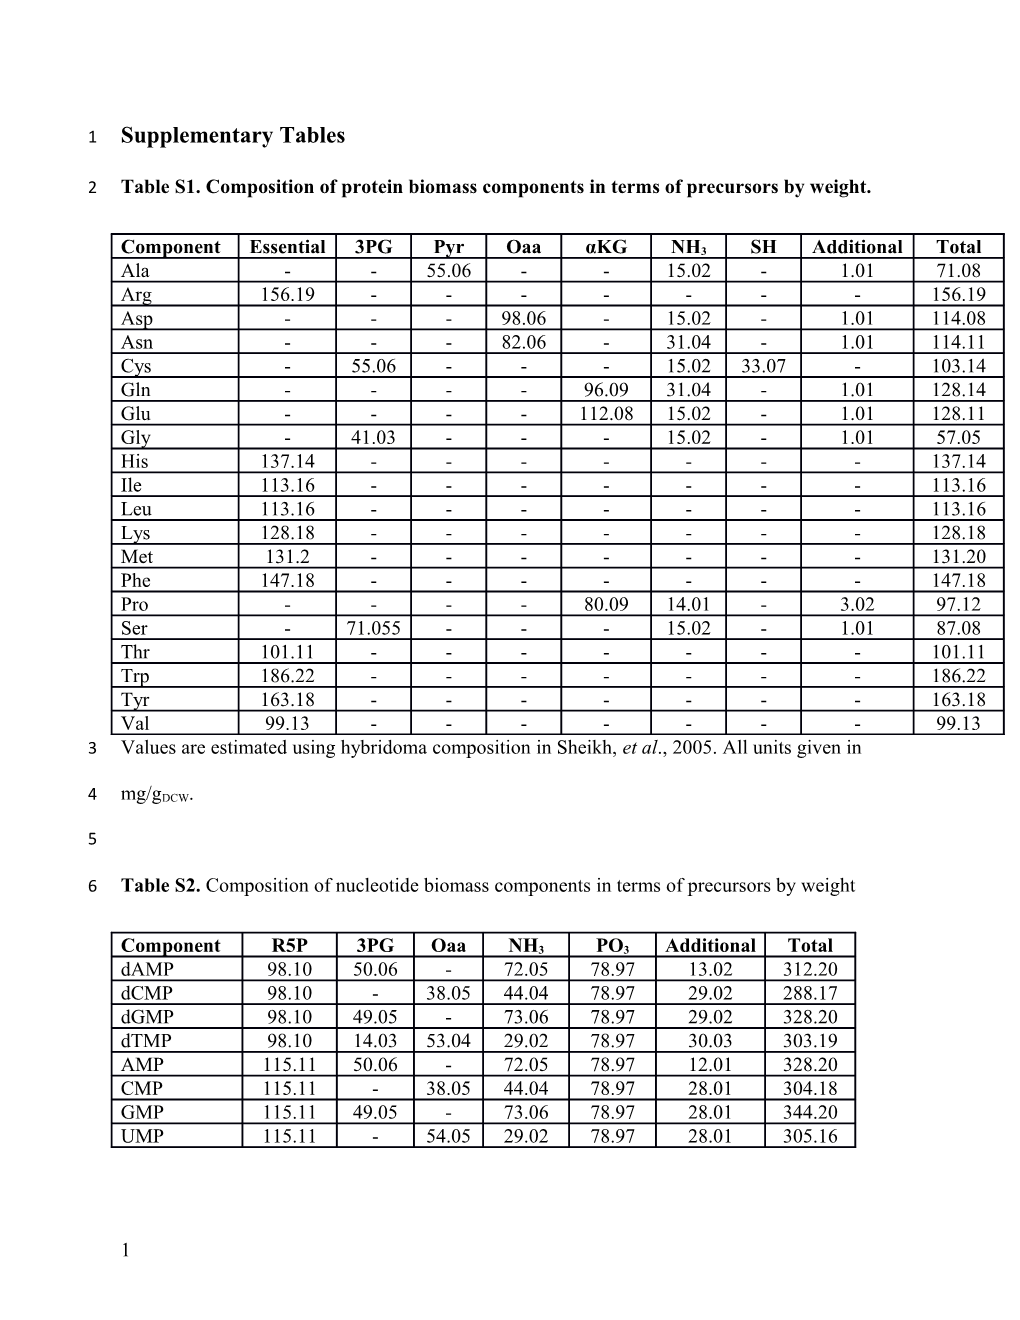 Table S1. Composition of Protein Biomass Components in Terms of Precursors by Weight